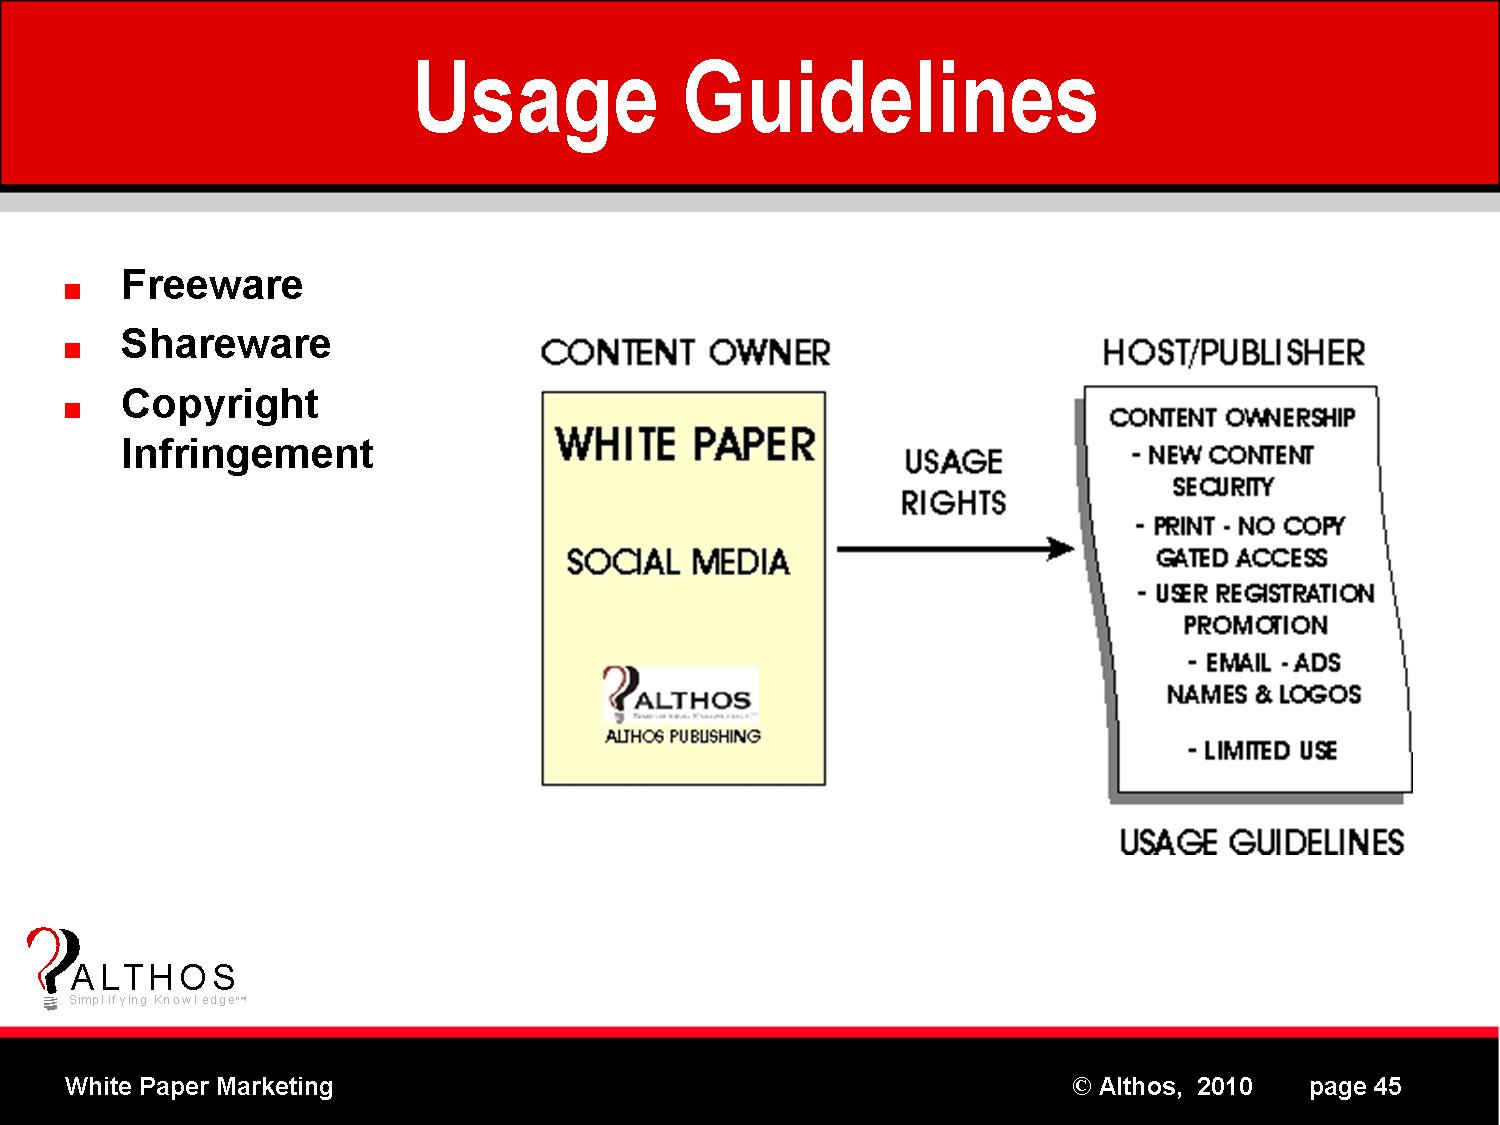 Usage Guidelines